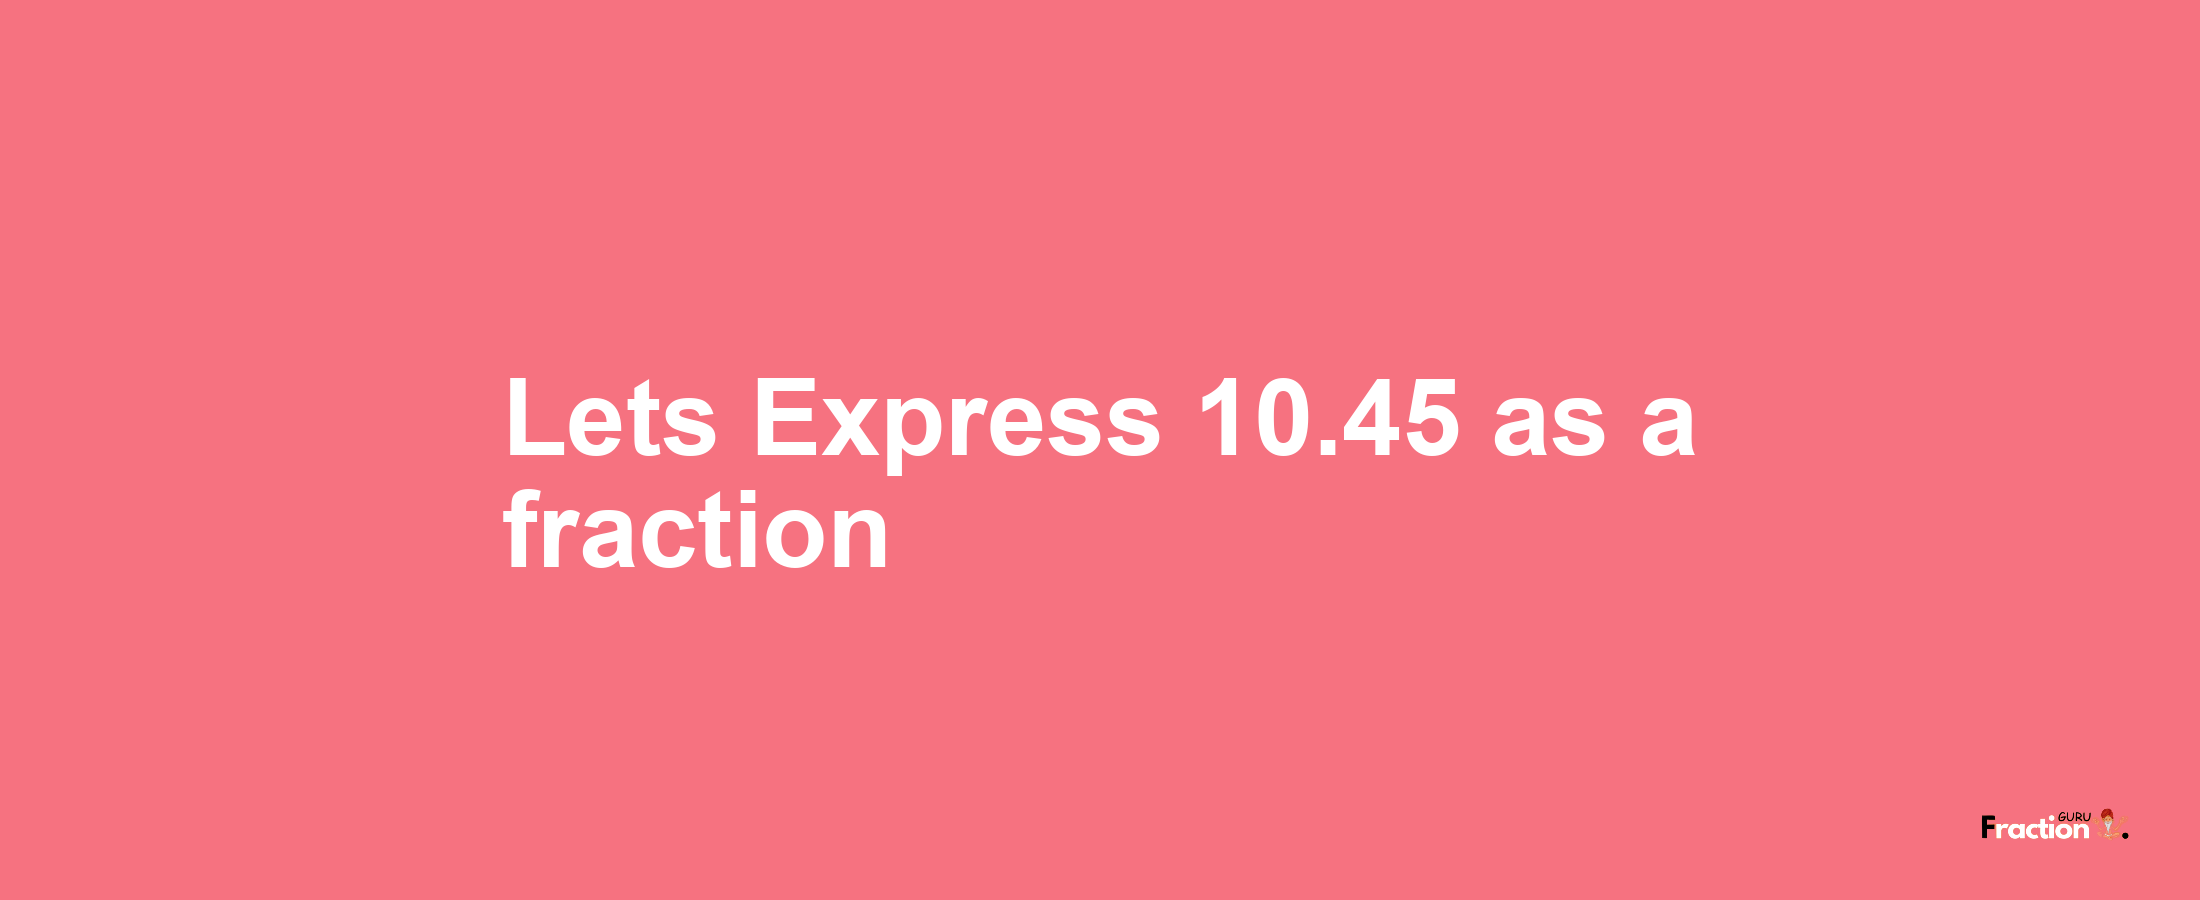 Lets Express 10.45 as afraction